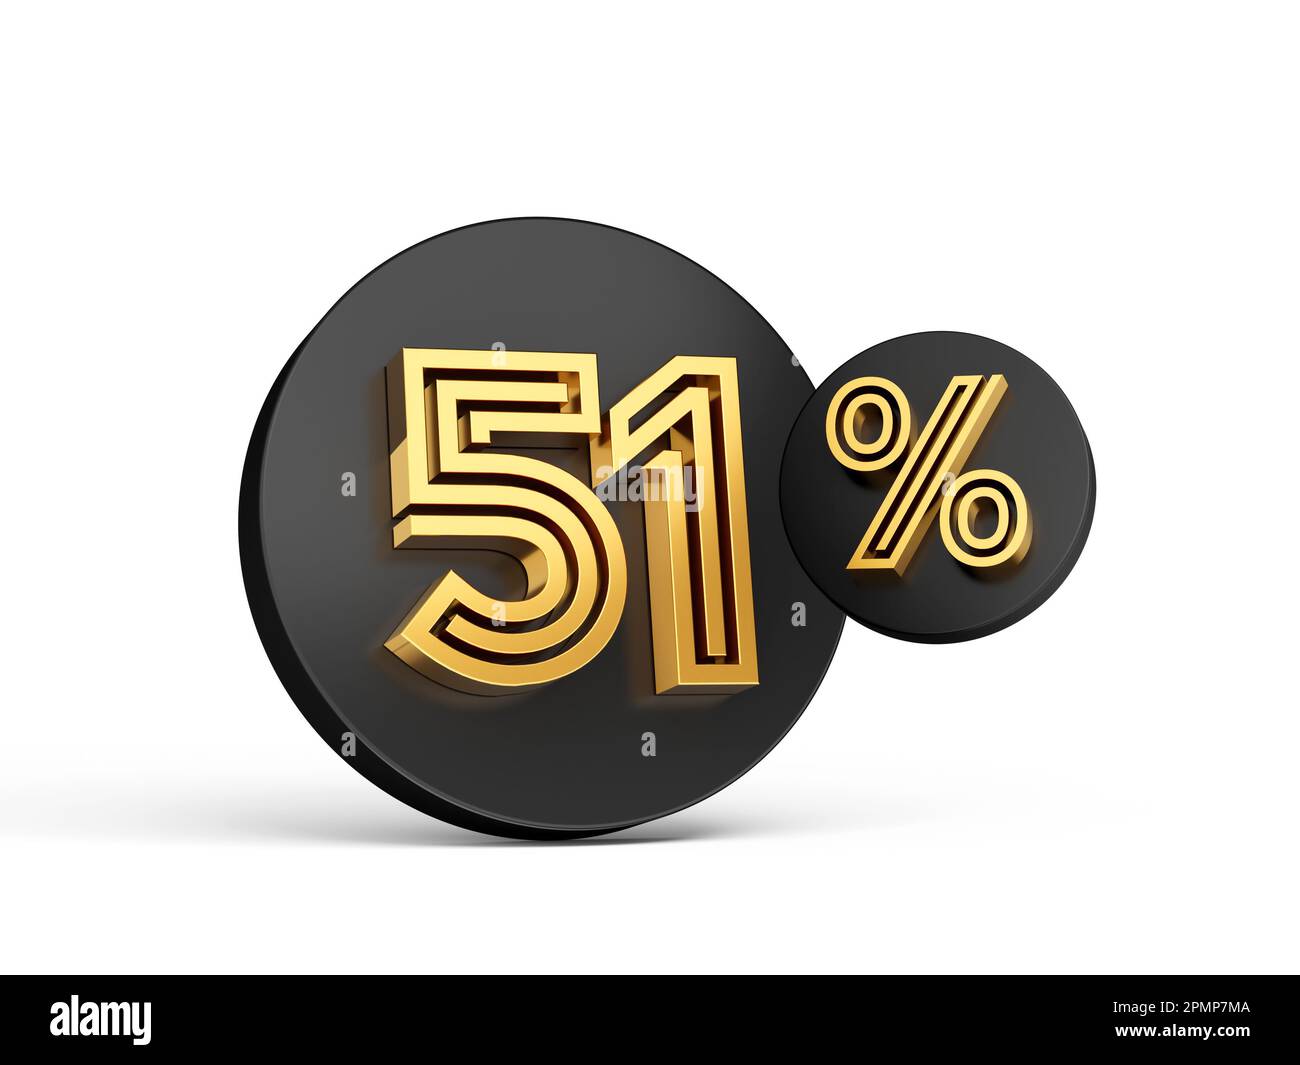 3D render of two black circles with golden 51 percent text on white background Stock Photo